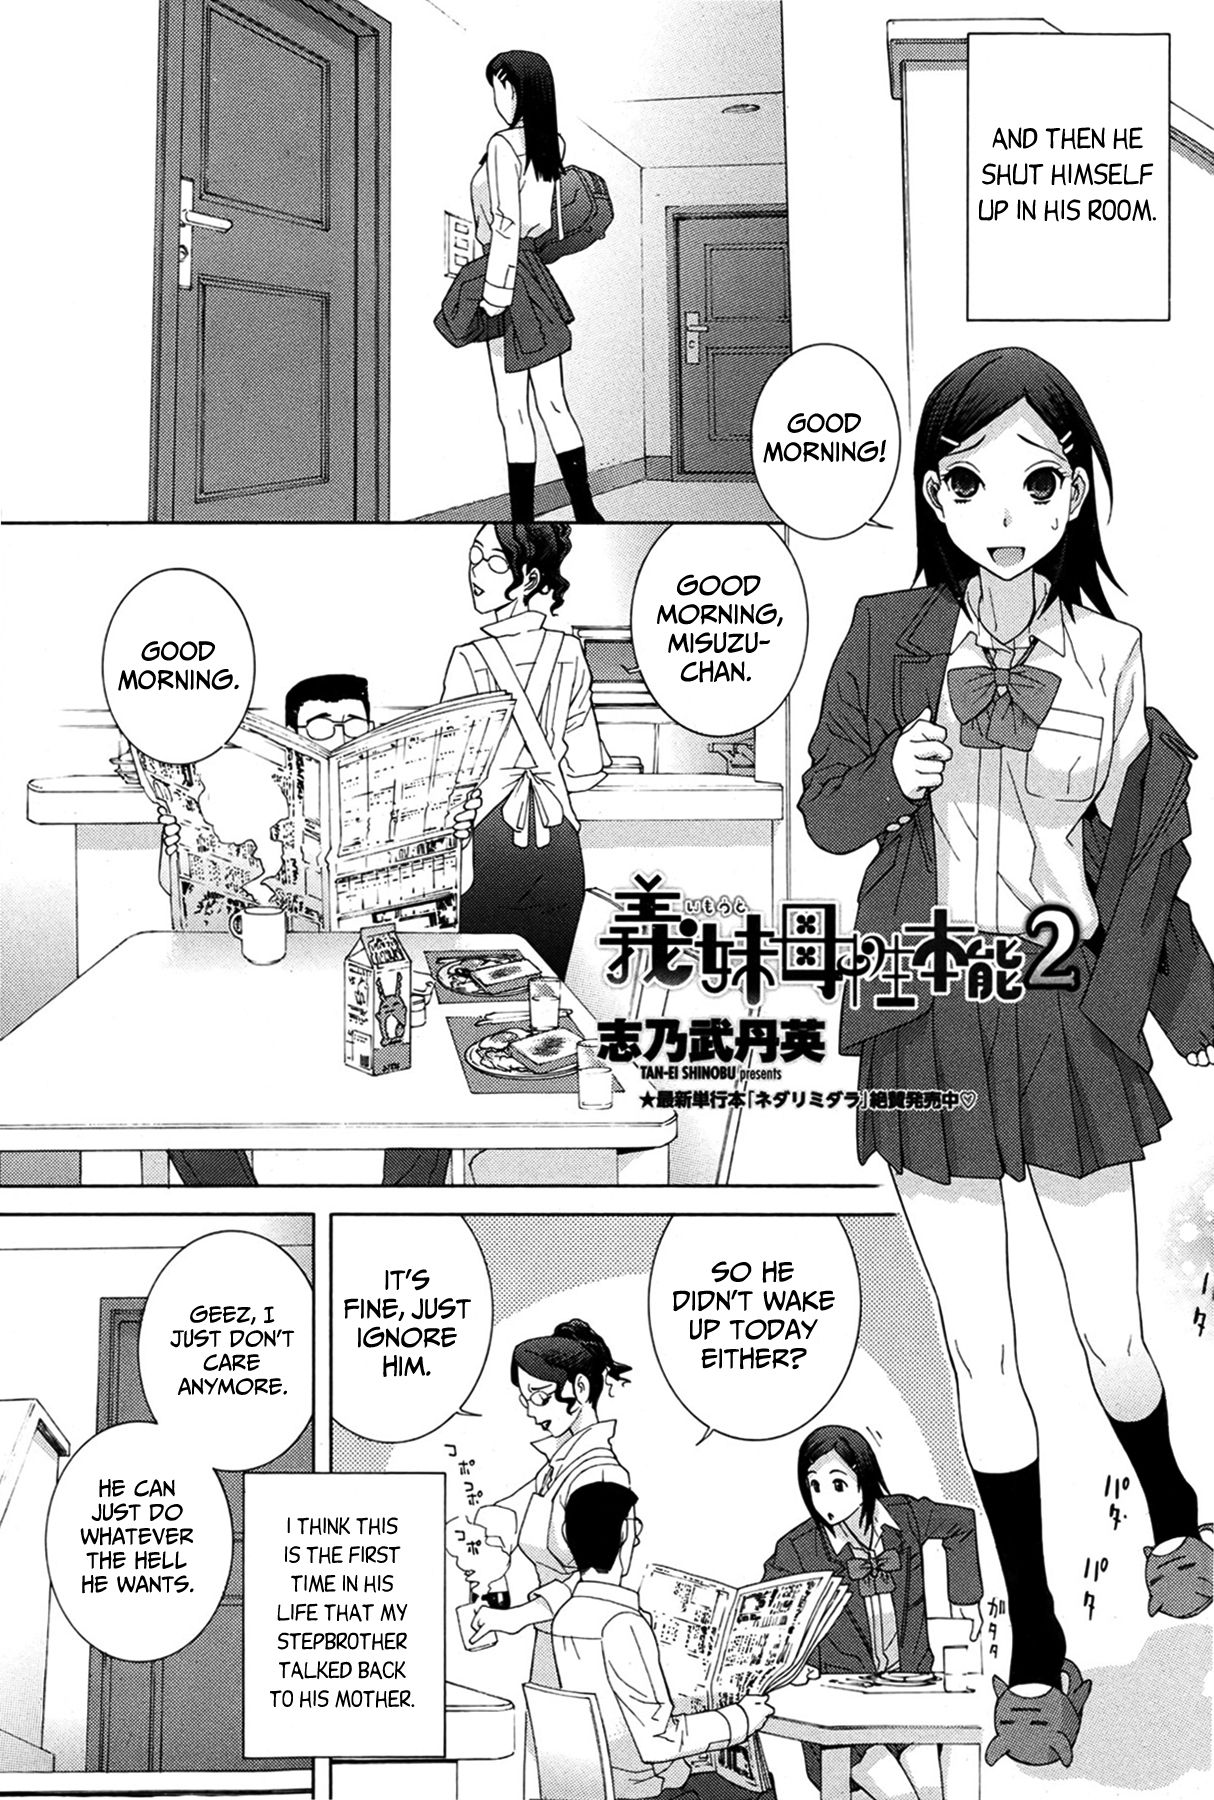 [Shinobu Tanei] The Motherly Instincts of a Step-sister 2 [English] {MumeiTL} 